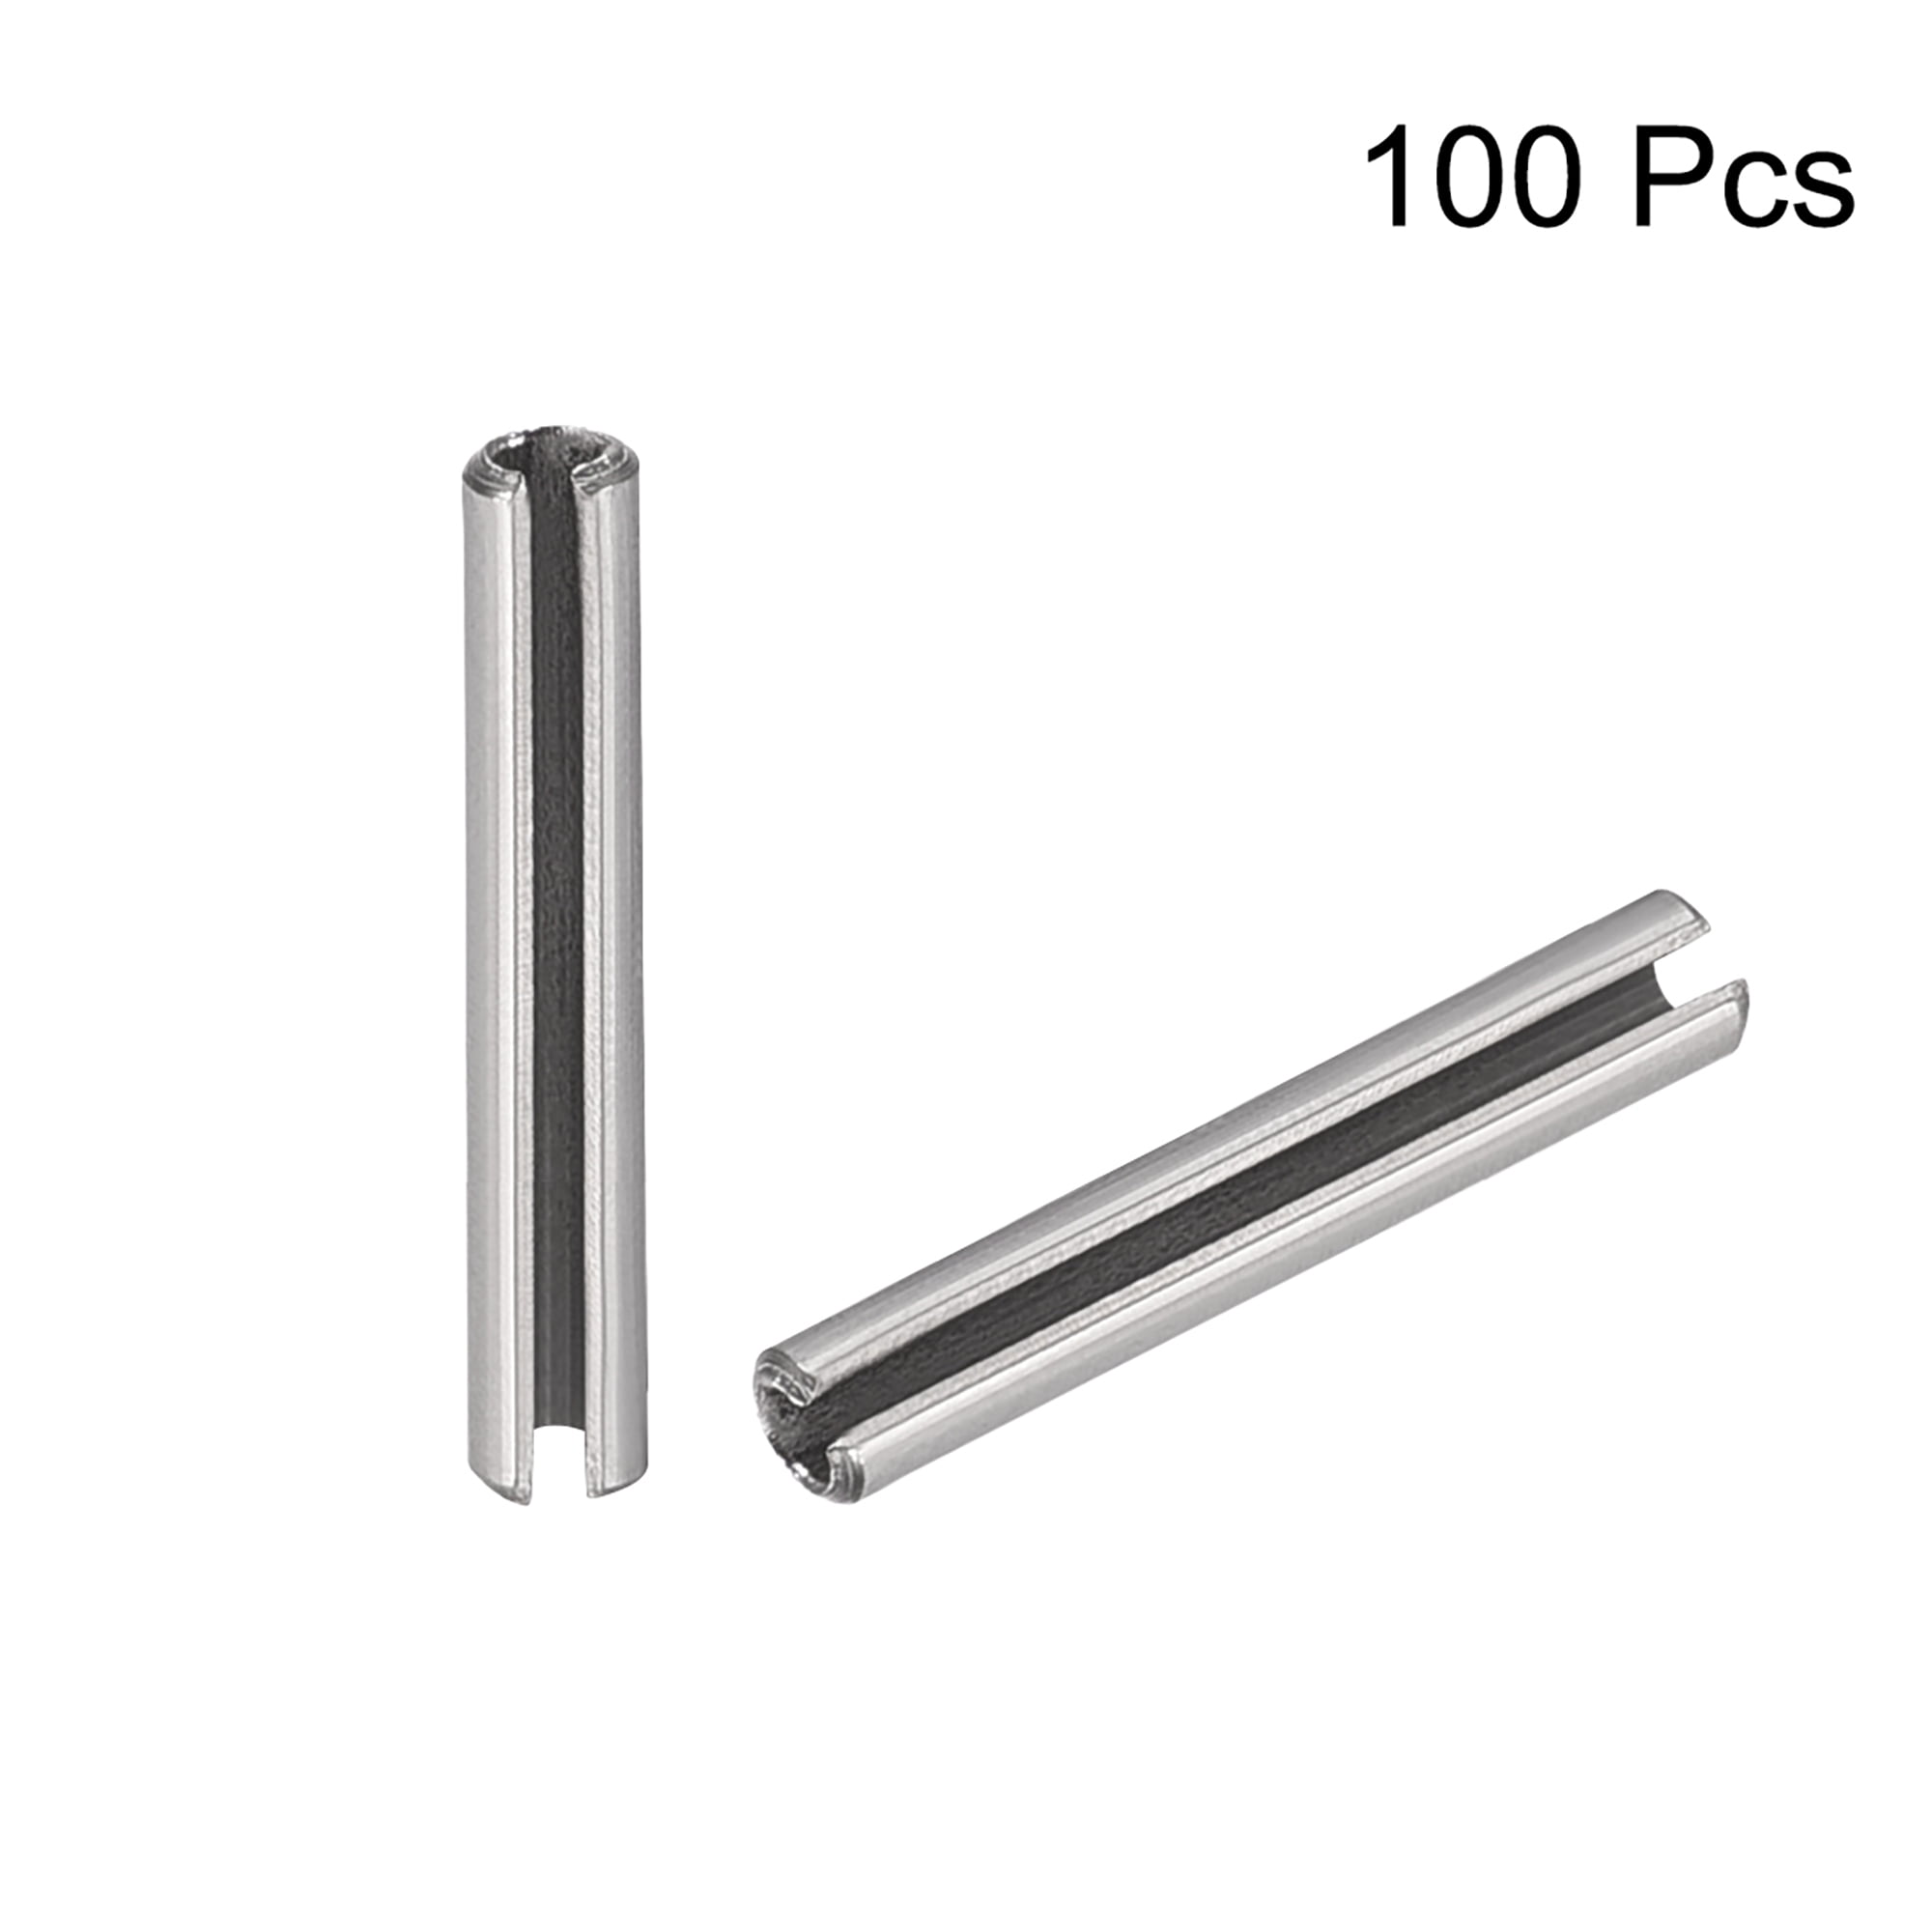 Slotted Roll Spring Pin 420 Stainless Steel 50 pcs 3/16" Dia x 1 7/8" Length 